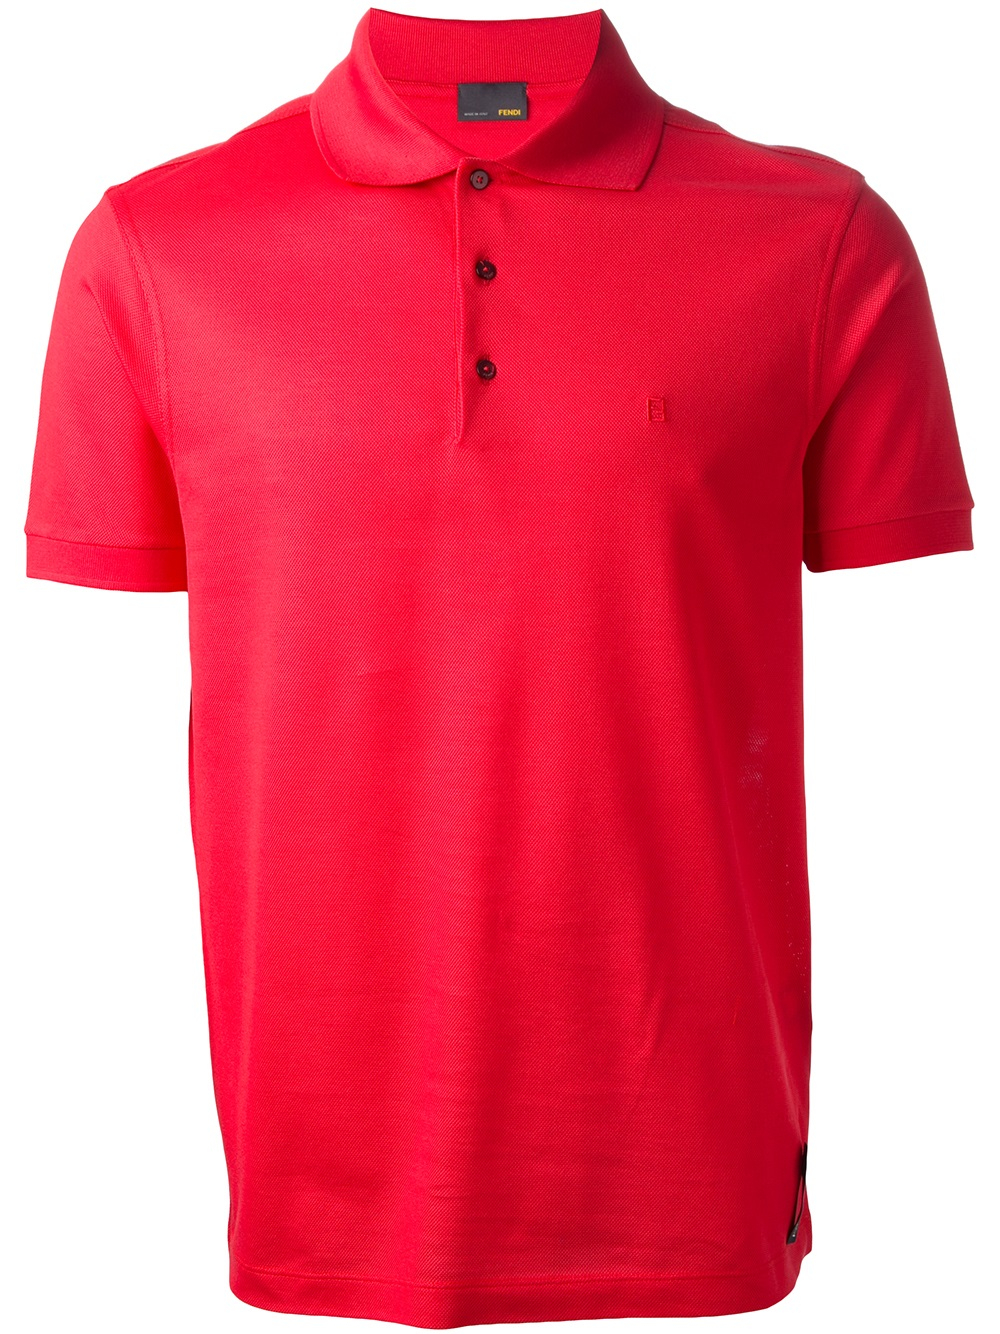 Fendi Classic Polo Shirt in Red for Men - Lyst